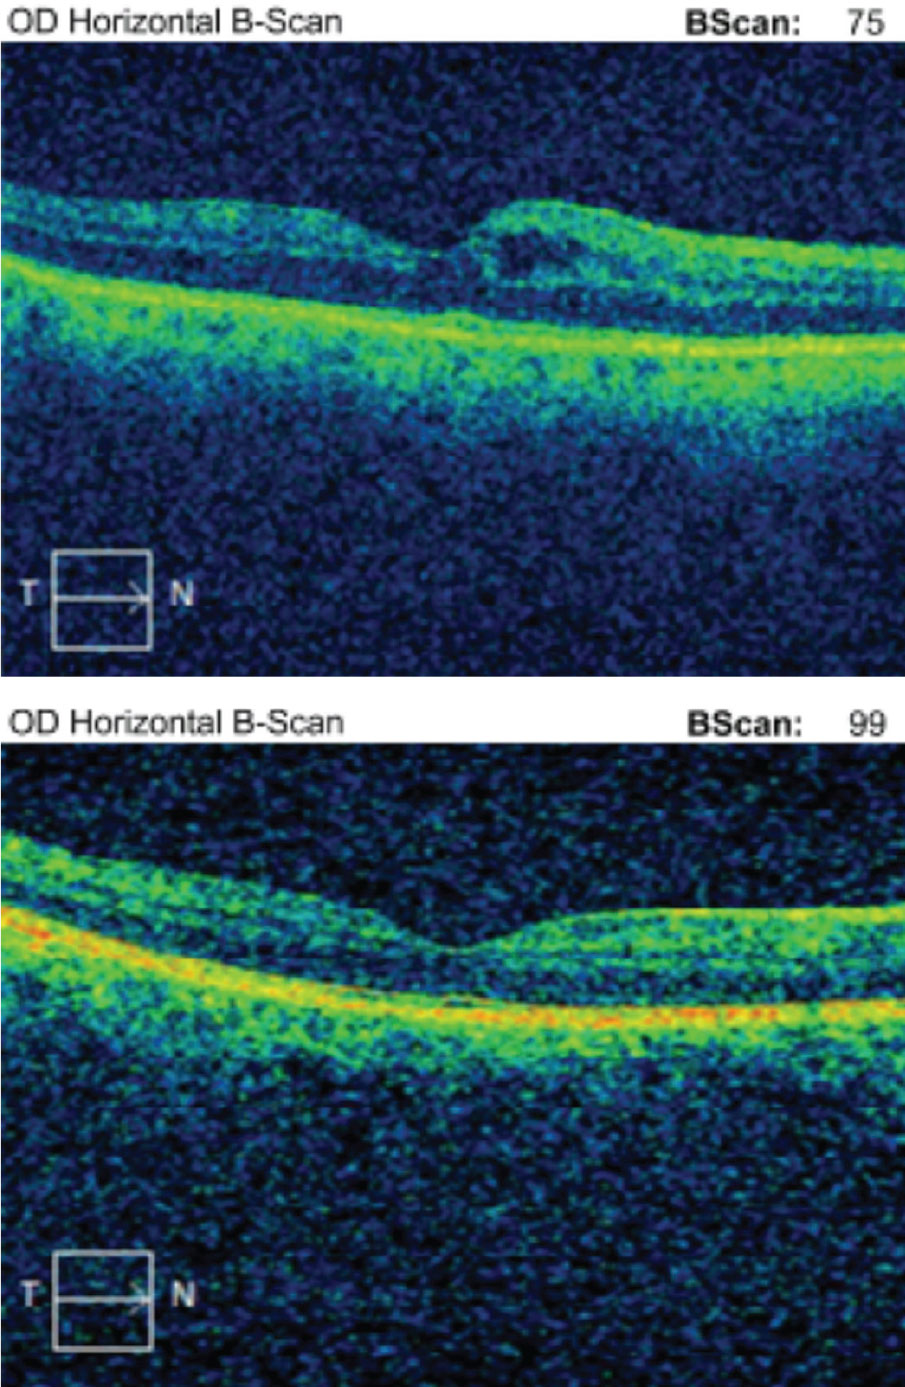 Case 3. Above is the initial macular OCT scan of a 64-year-old black female who developed IGS nine weeks post-op in the right eye. BCVA was 20/40. Below is her macular OCT scan after 11 weeks of difluprednate 0.05% and ketorolac 0.5% therapy in the right eye. Her BCVA resolved to 20/20.